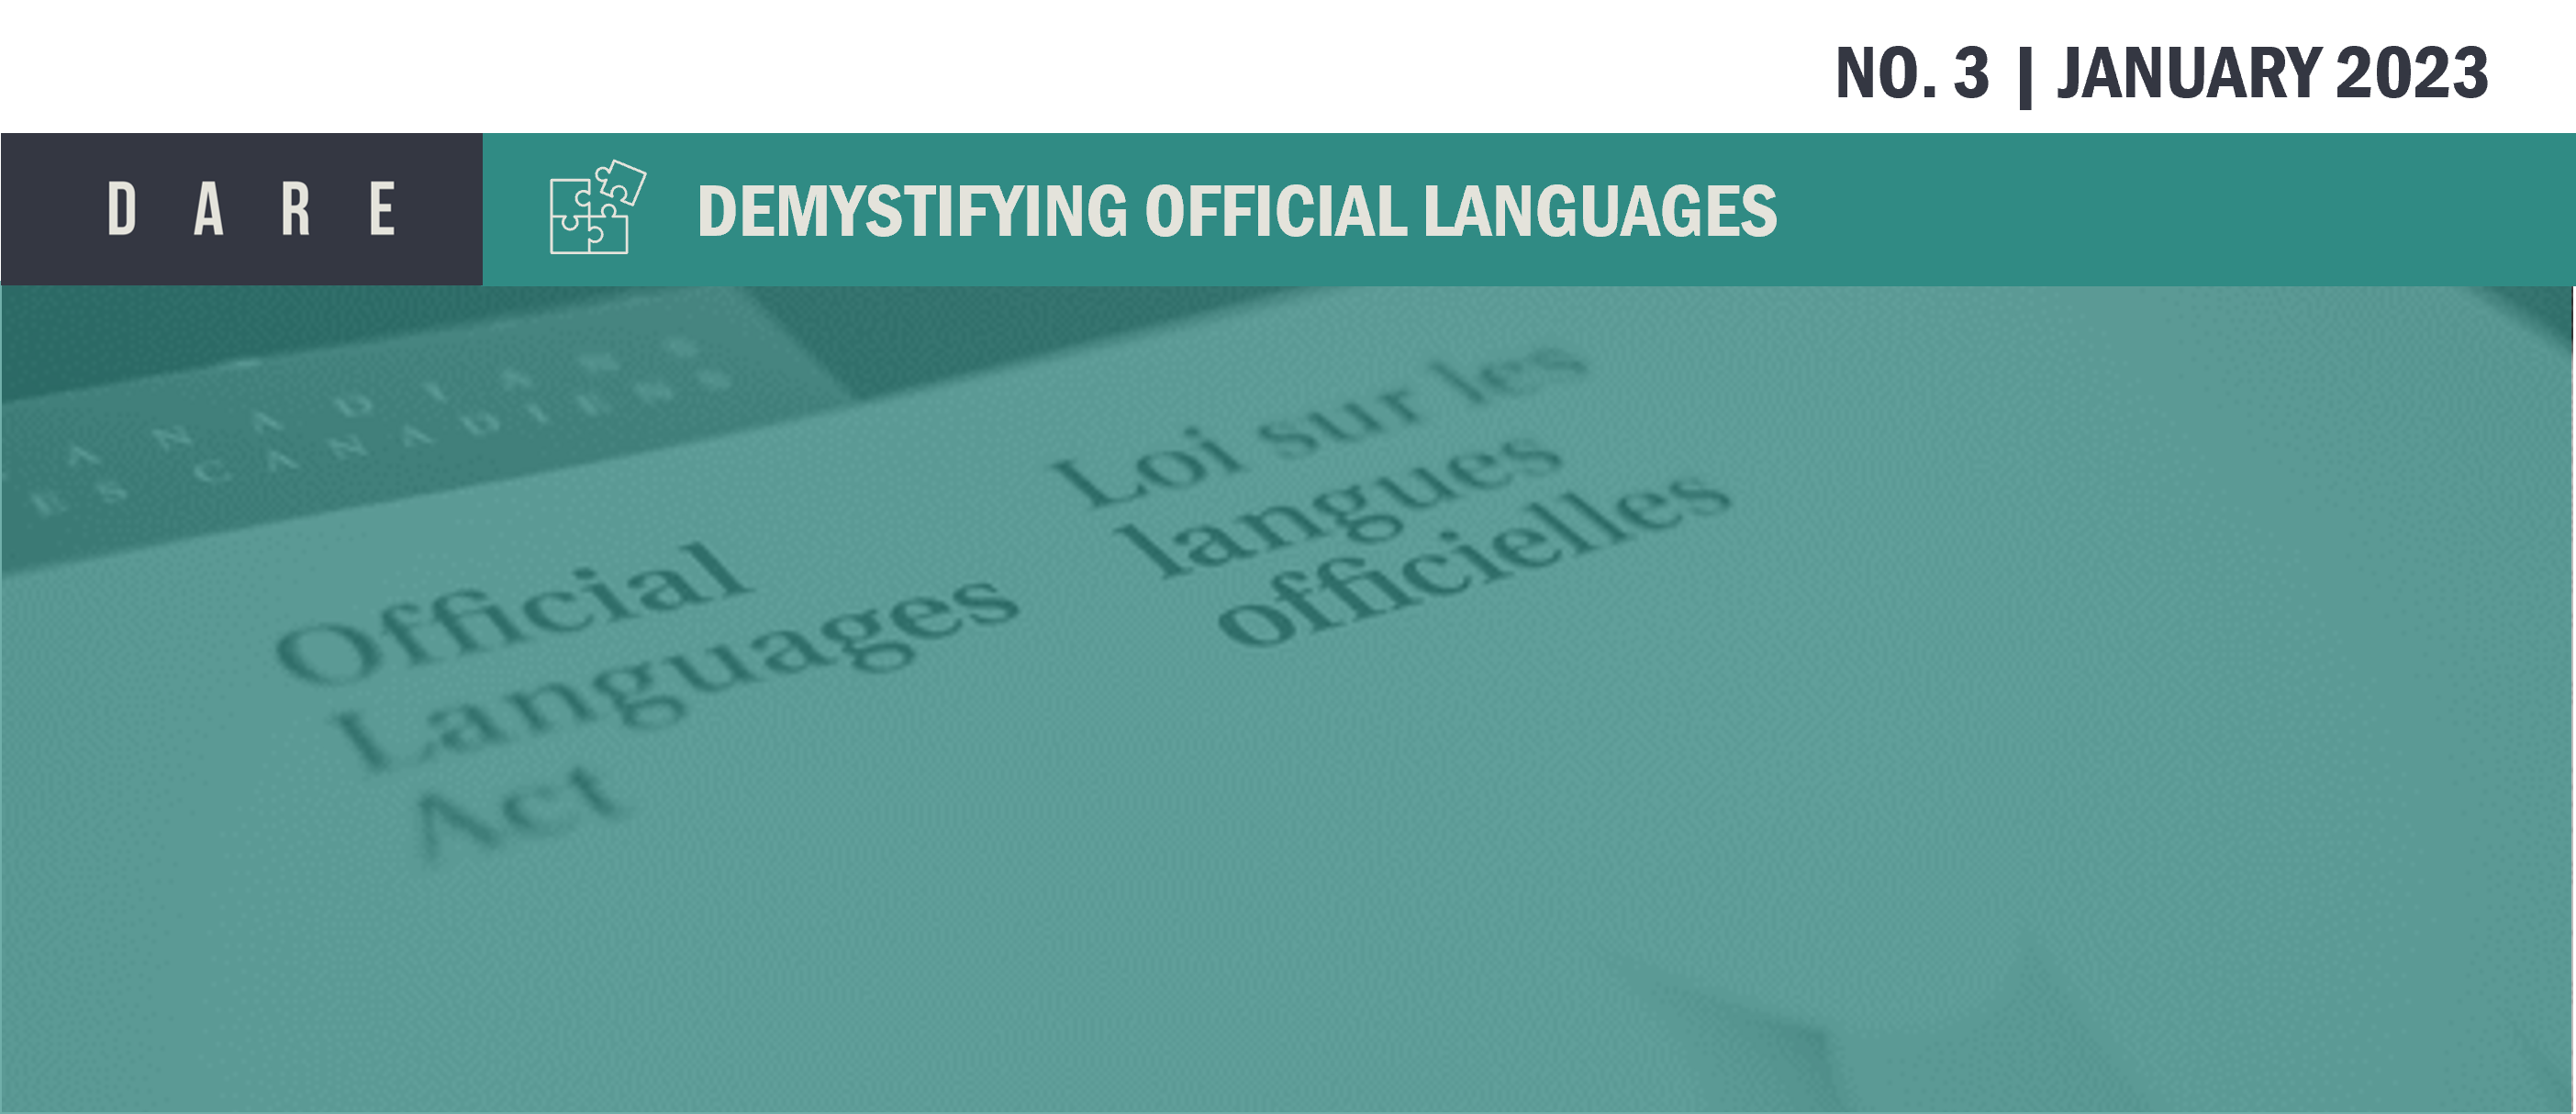 Alt=Image of the Official Languages Act. Demystifying Official Languages. Dare Newsletter, no 3, January 2023.